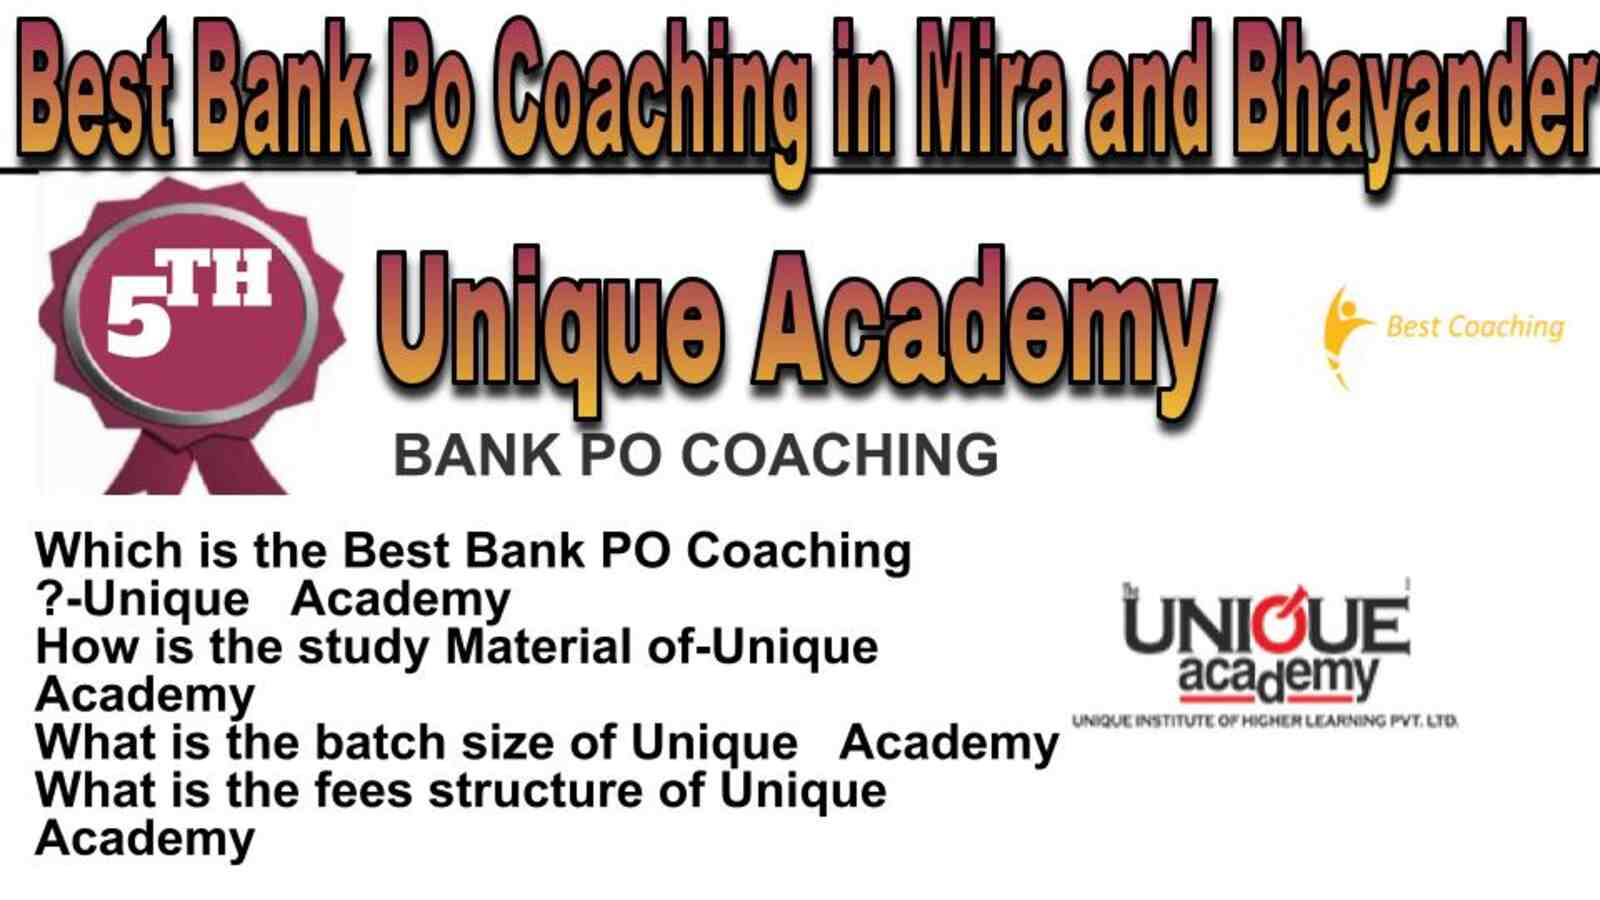 Rank 5 best bank po coaching in Mira and Bhayander